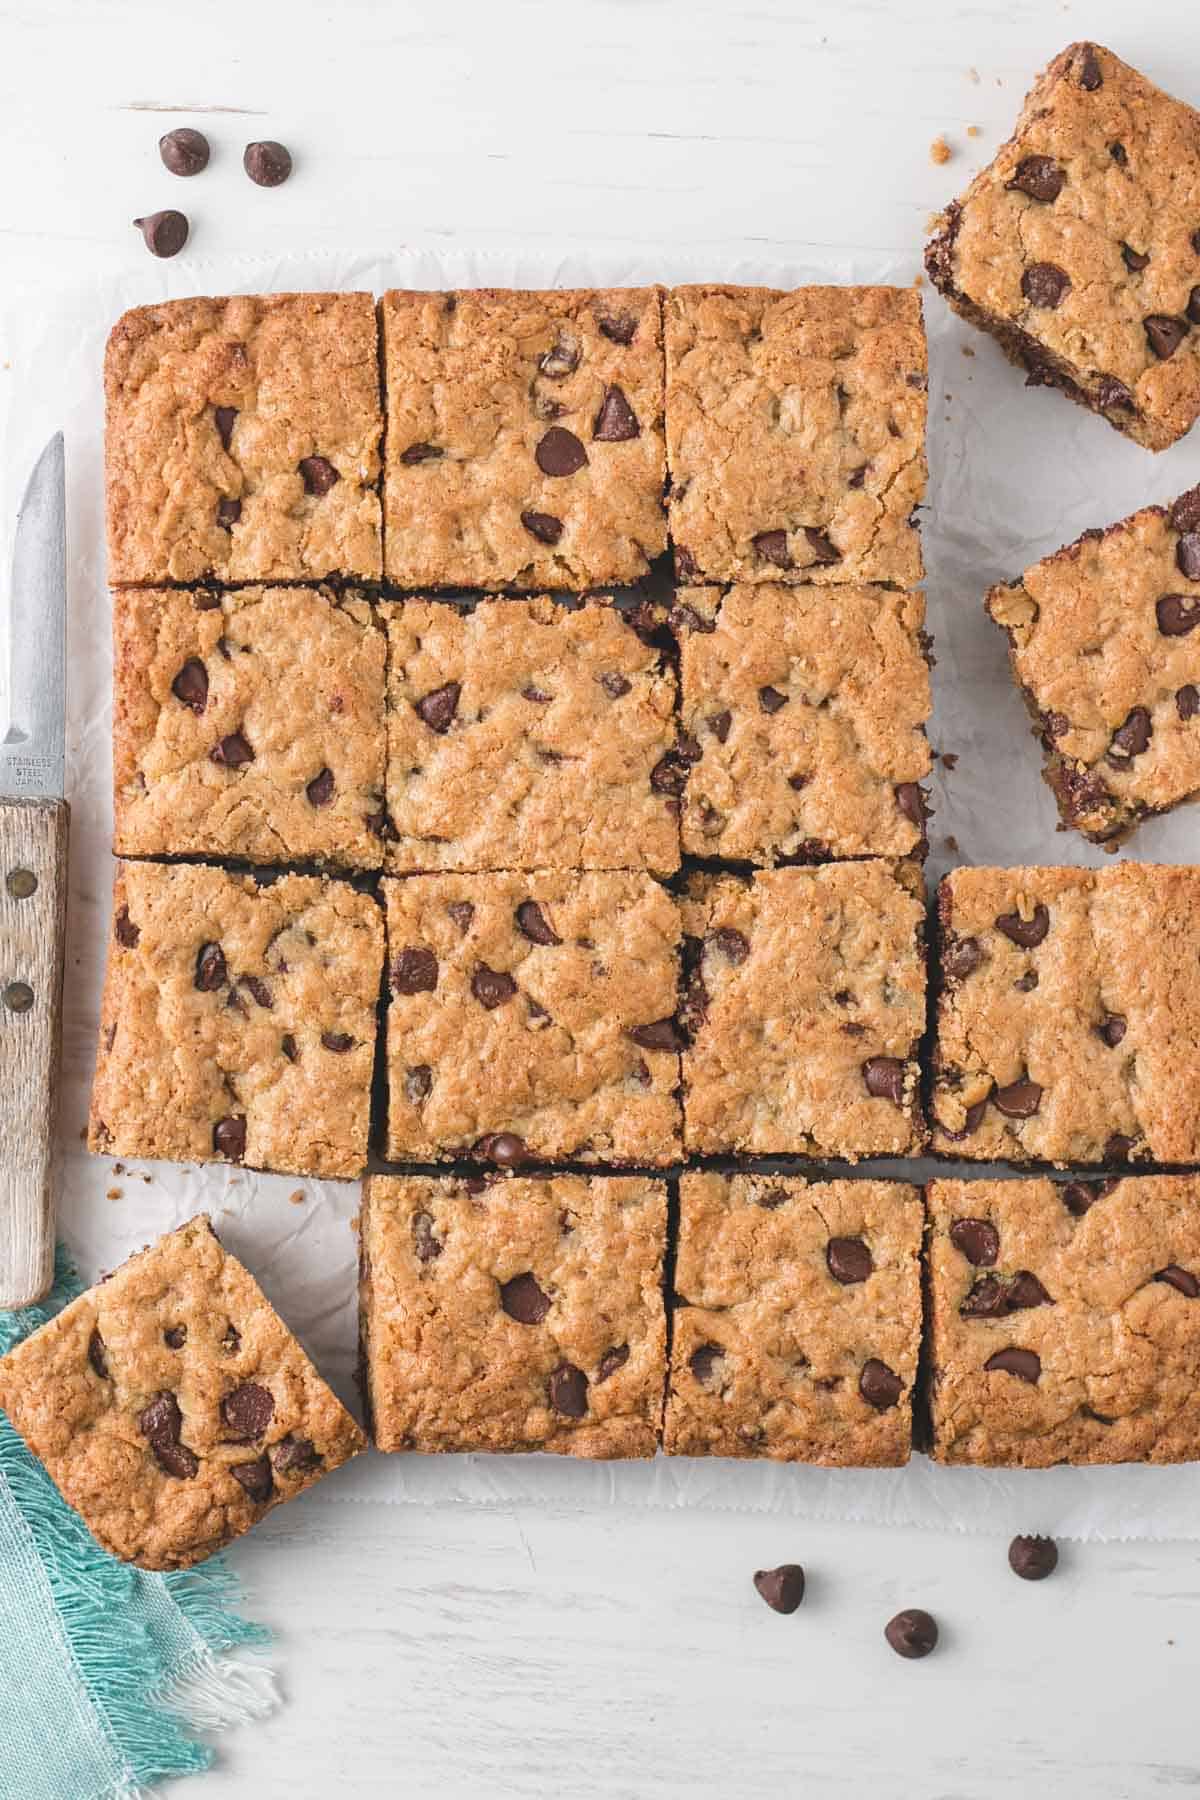 A batch of Gluten-free Oatmeal Chocolate Chip Bars cut into squares.